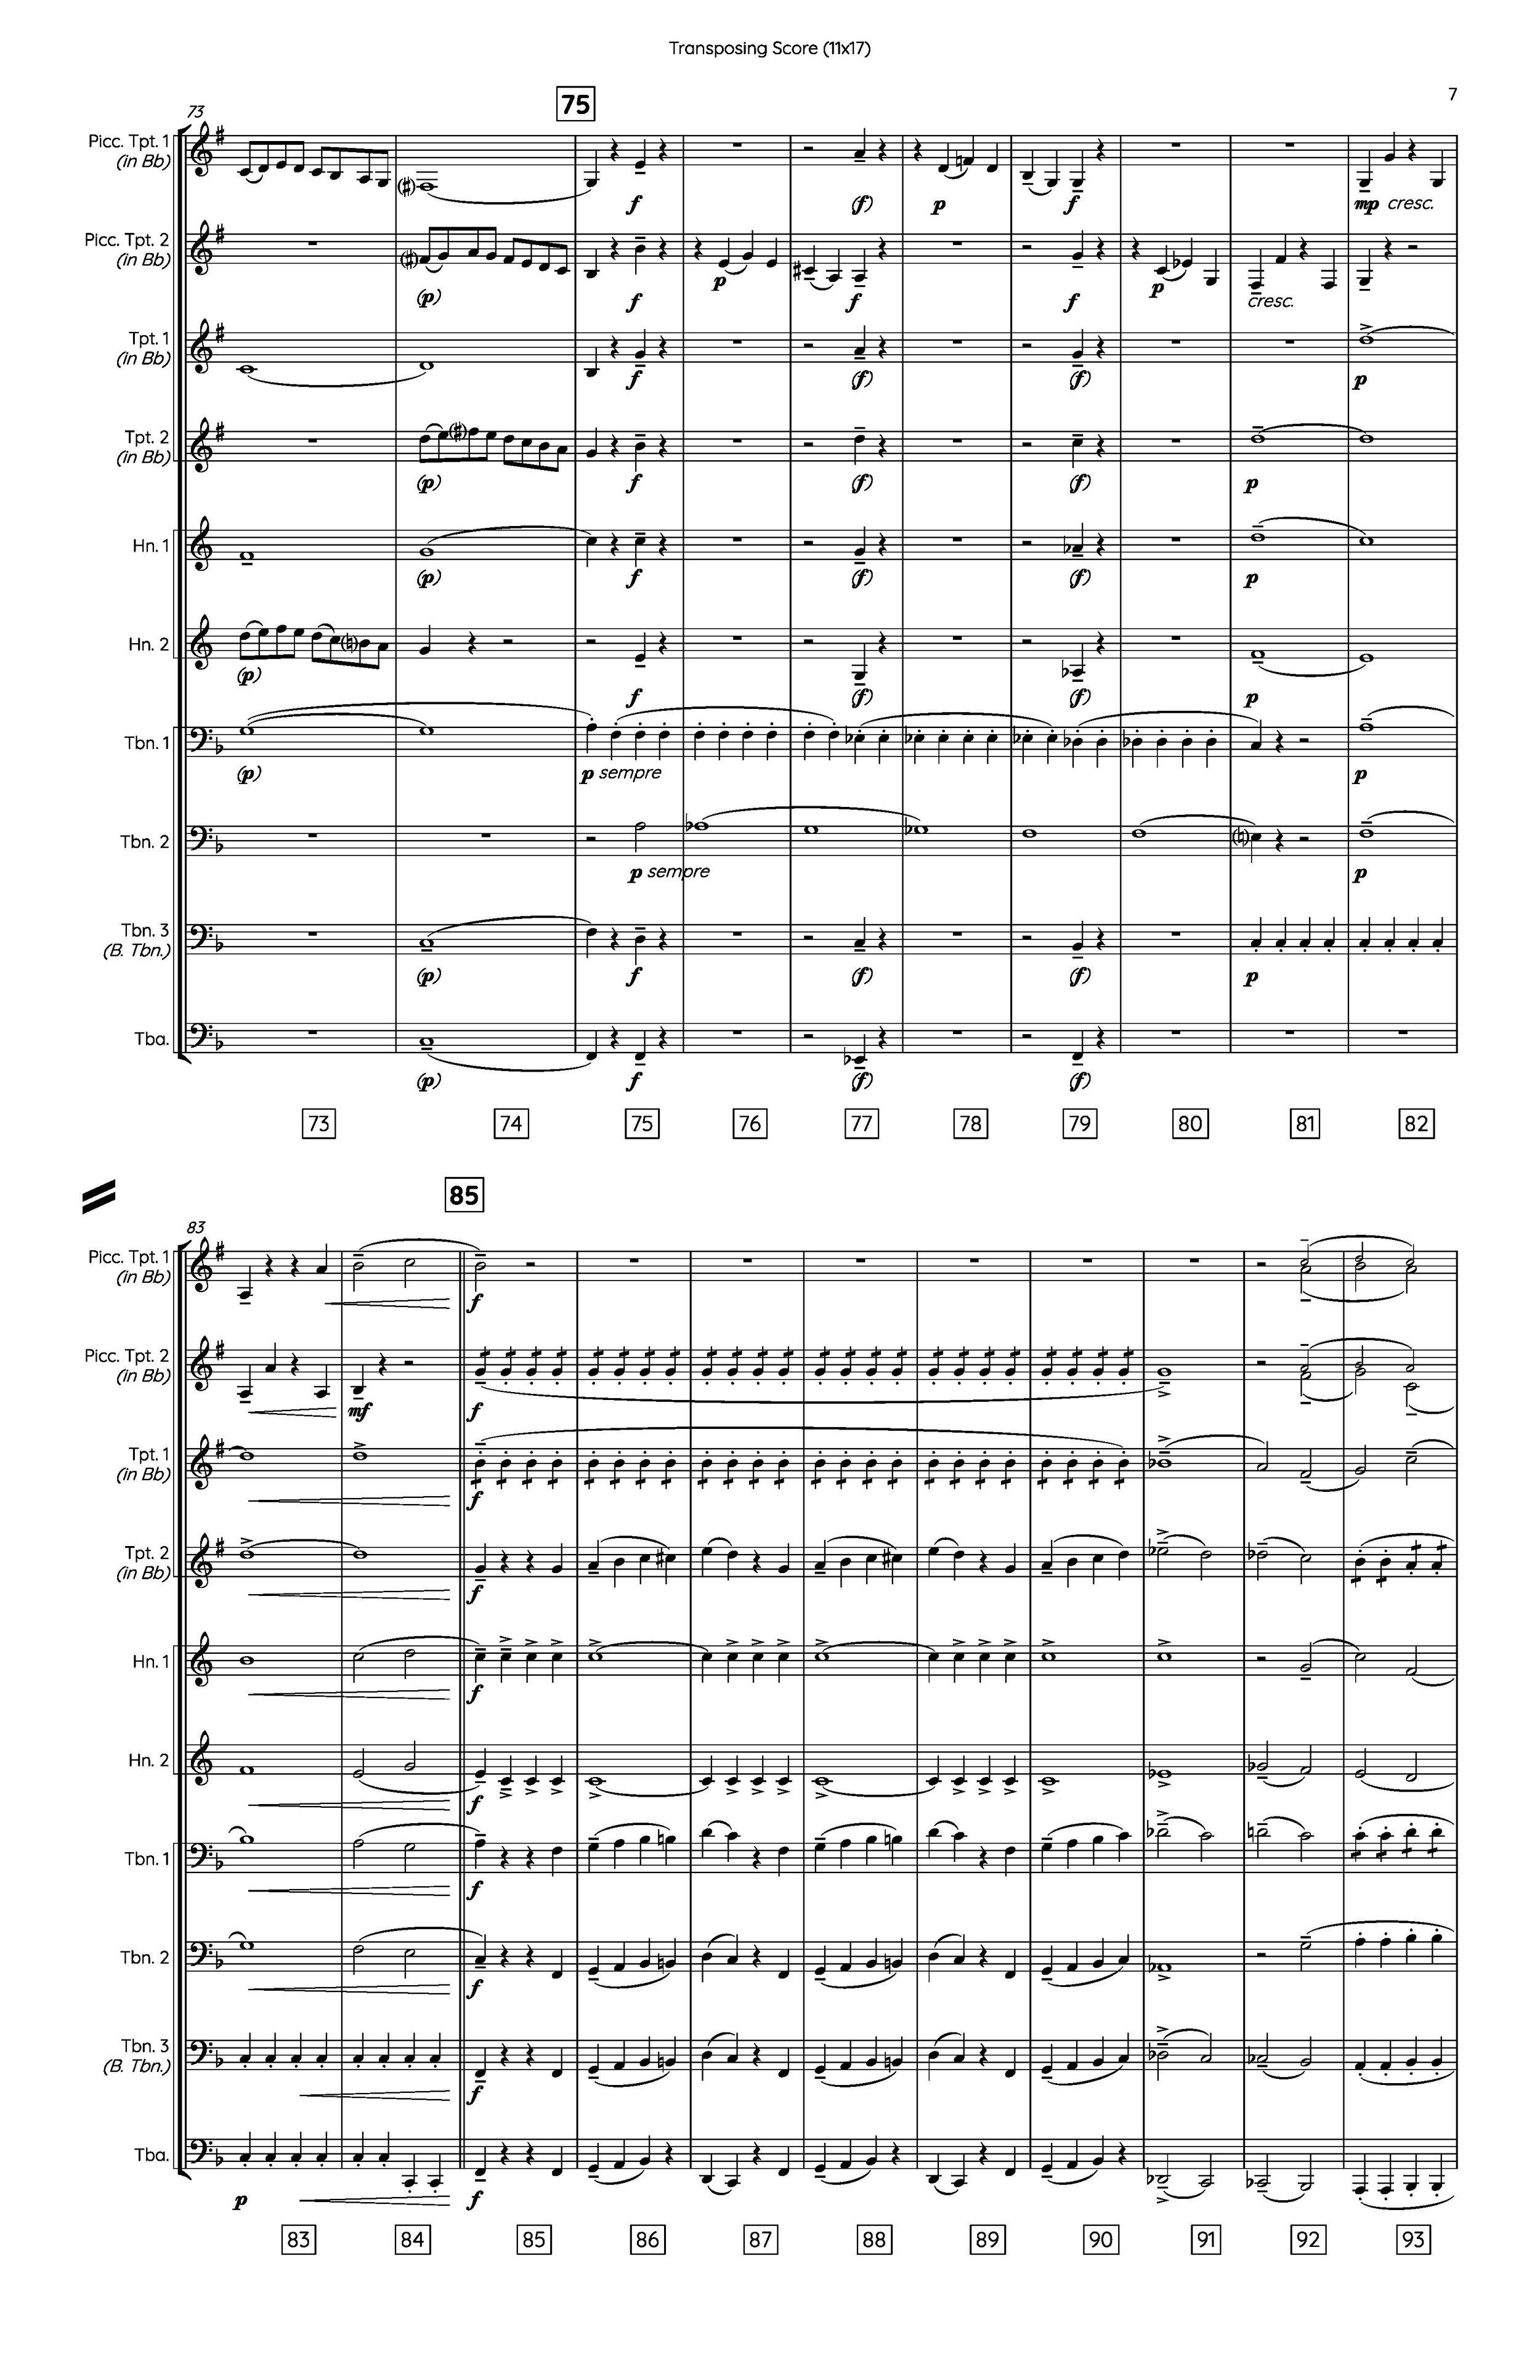 Marriage of Figaro [Brass Ensemble] in Bb - Score 11x17_Page_07.jpg